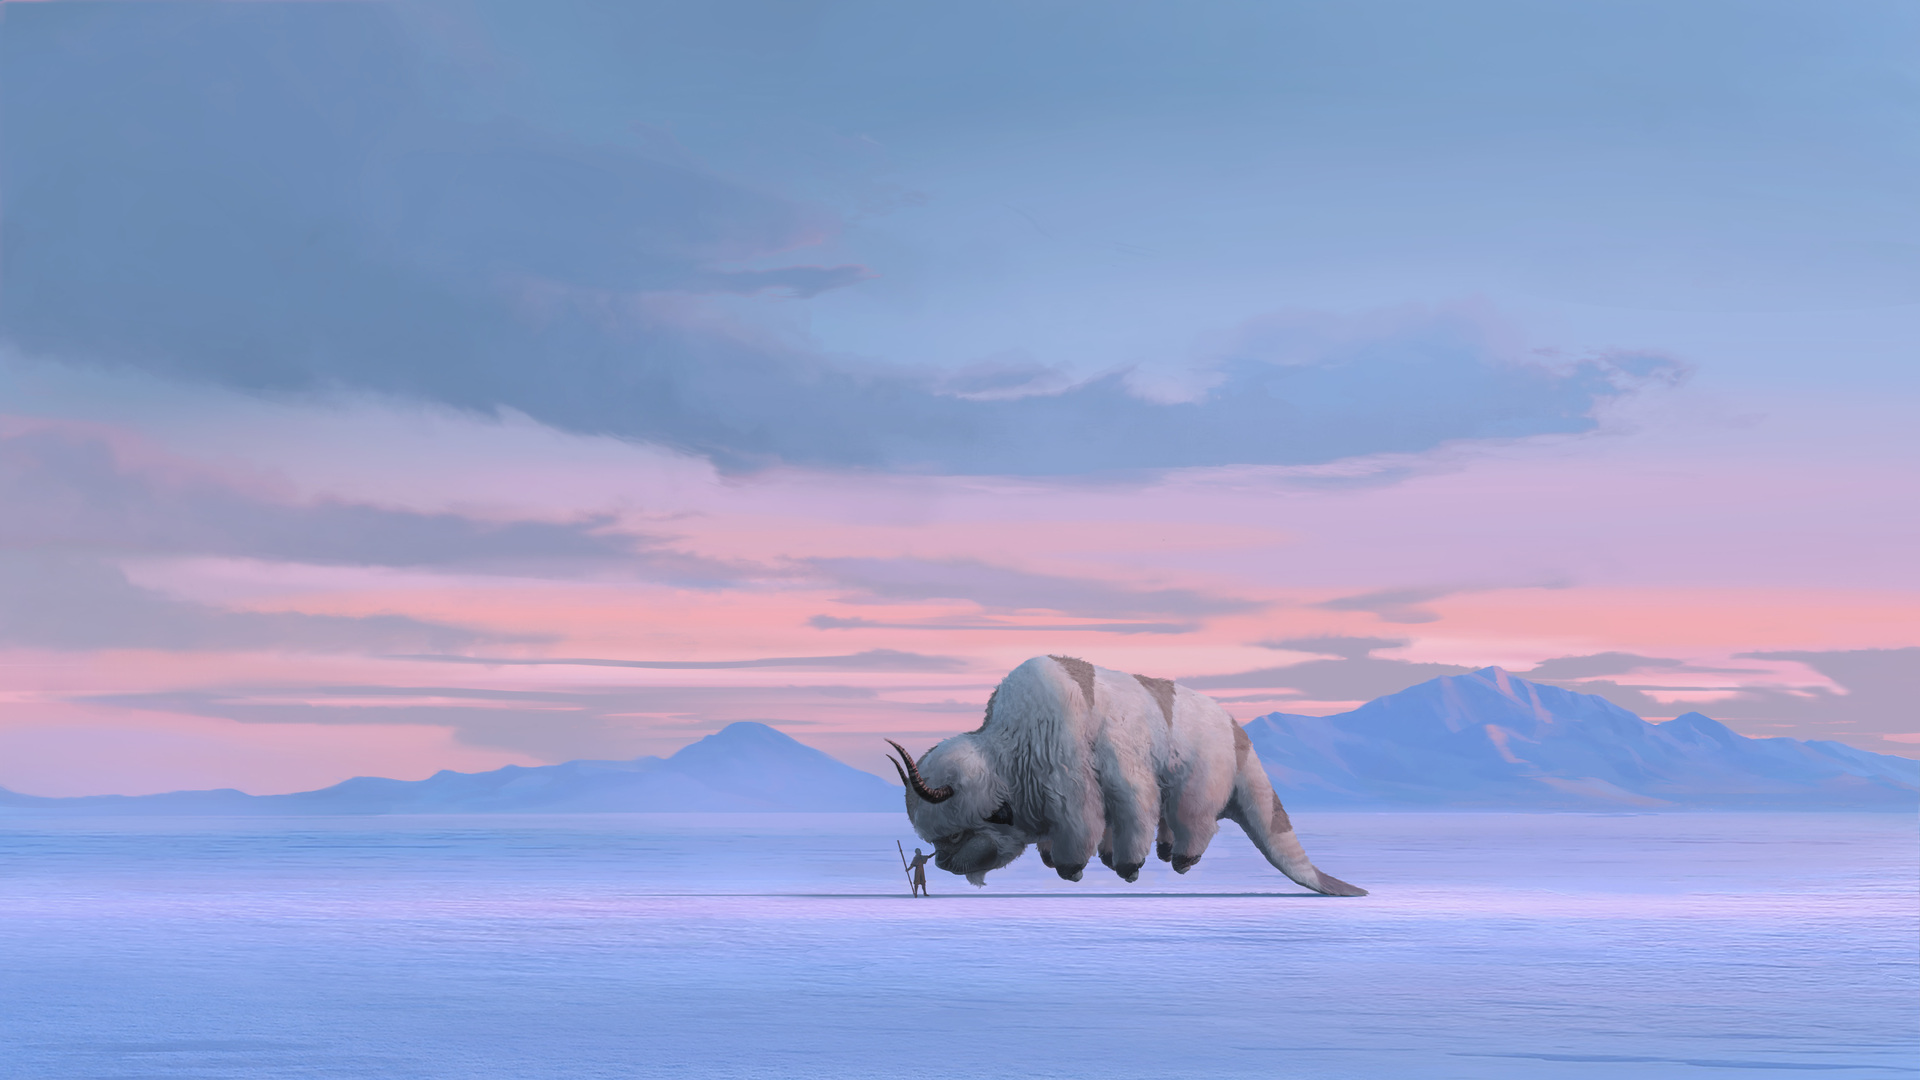 X avatar the last airbender laptop full hd p hd k wallpapers images backgrounds photos and pictures